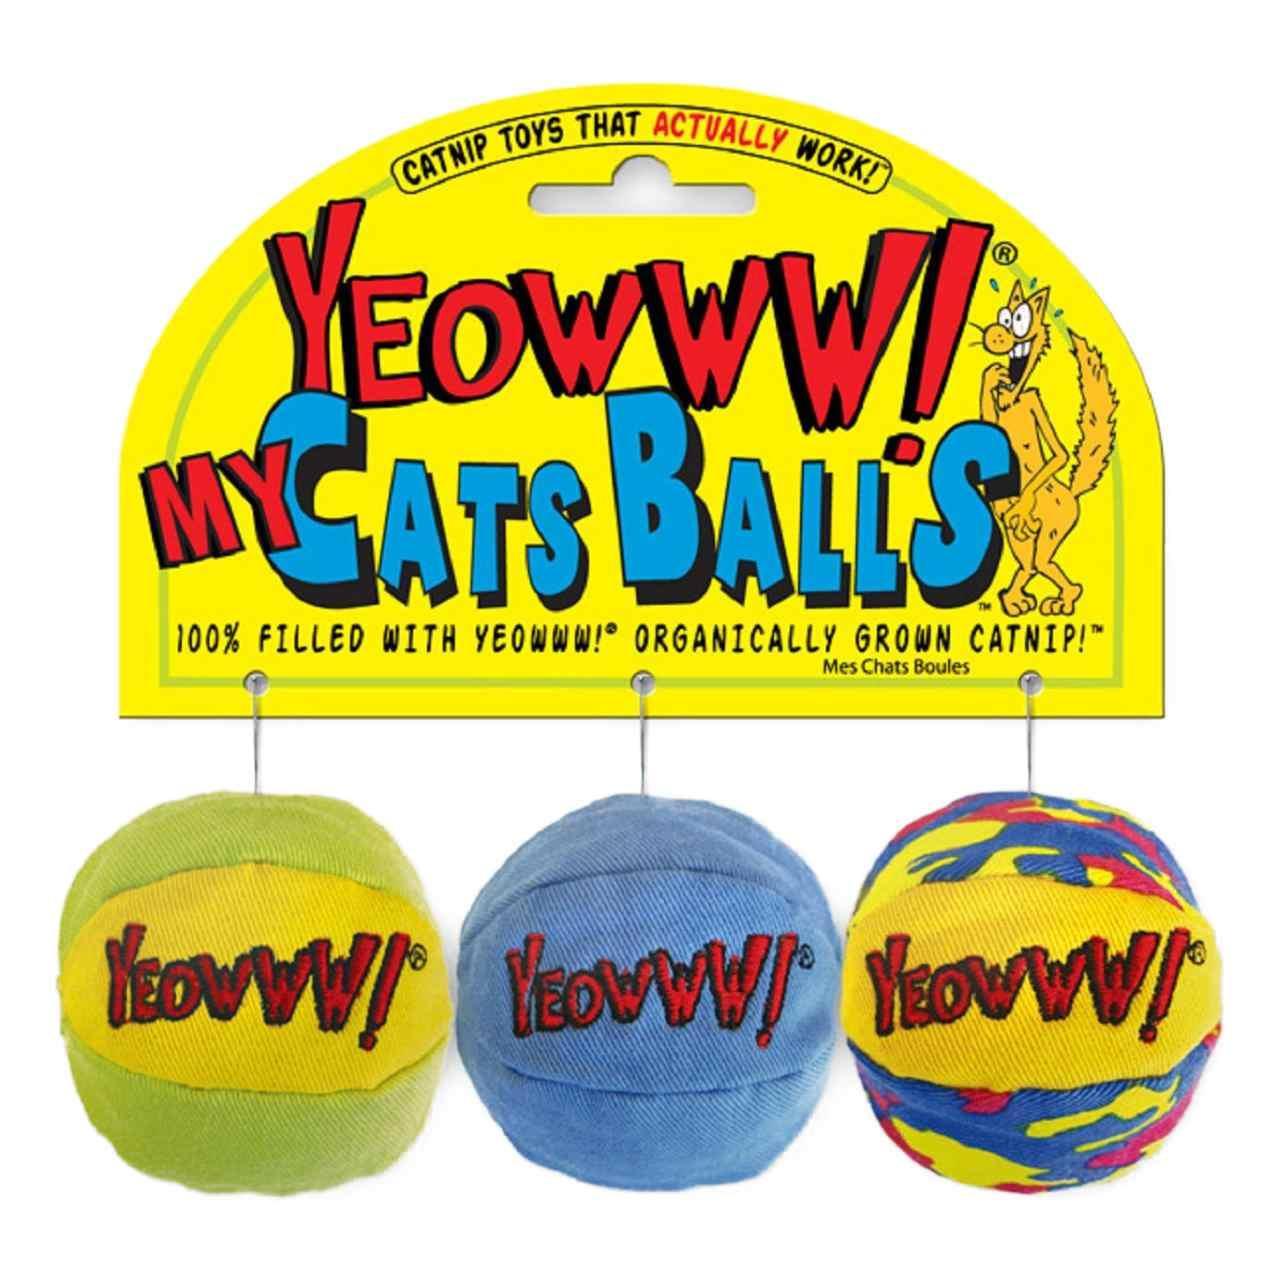 An image of Yeowww My Cats Balls